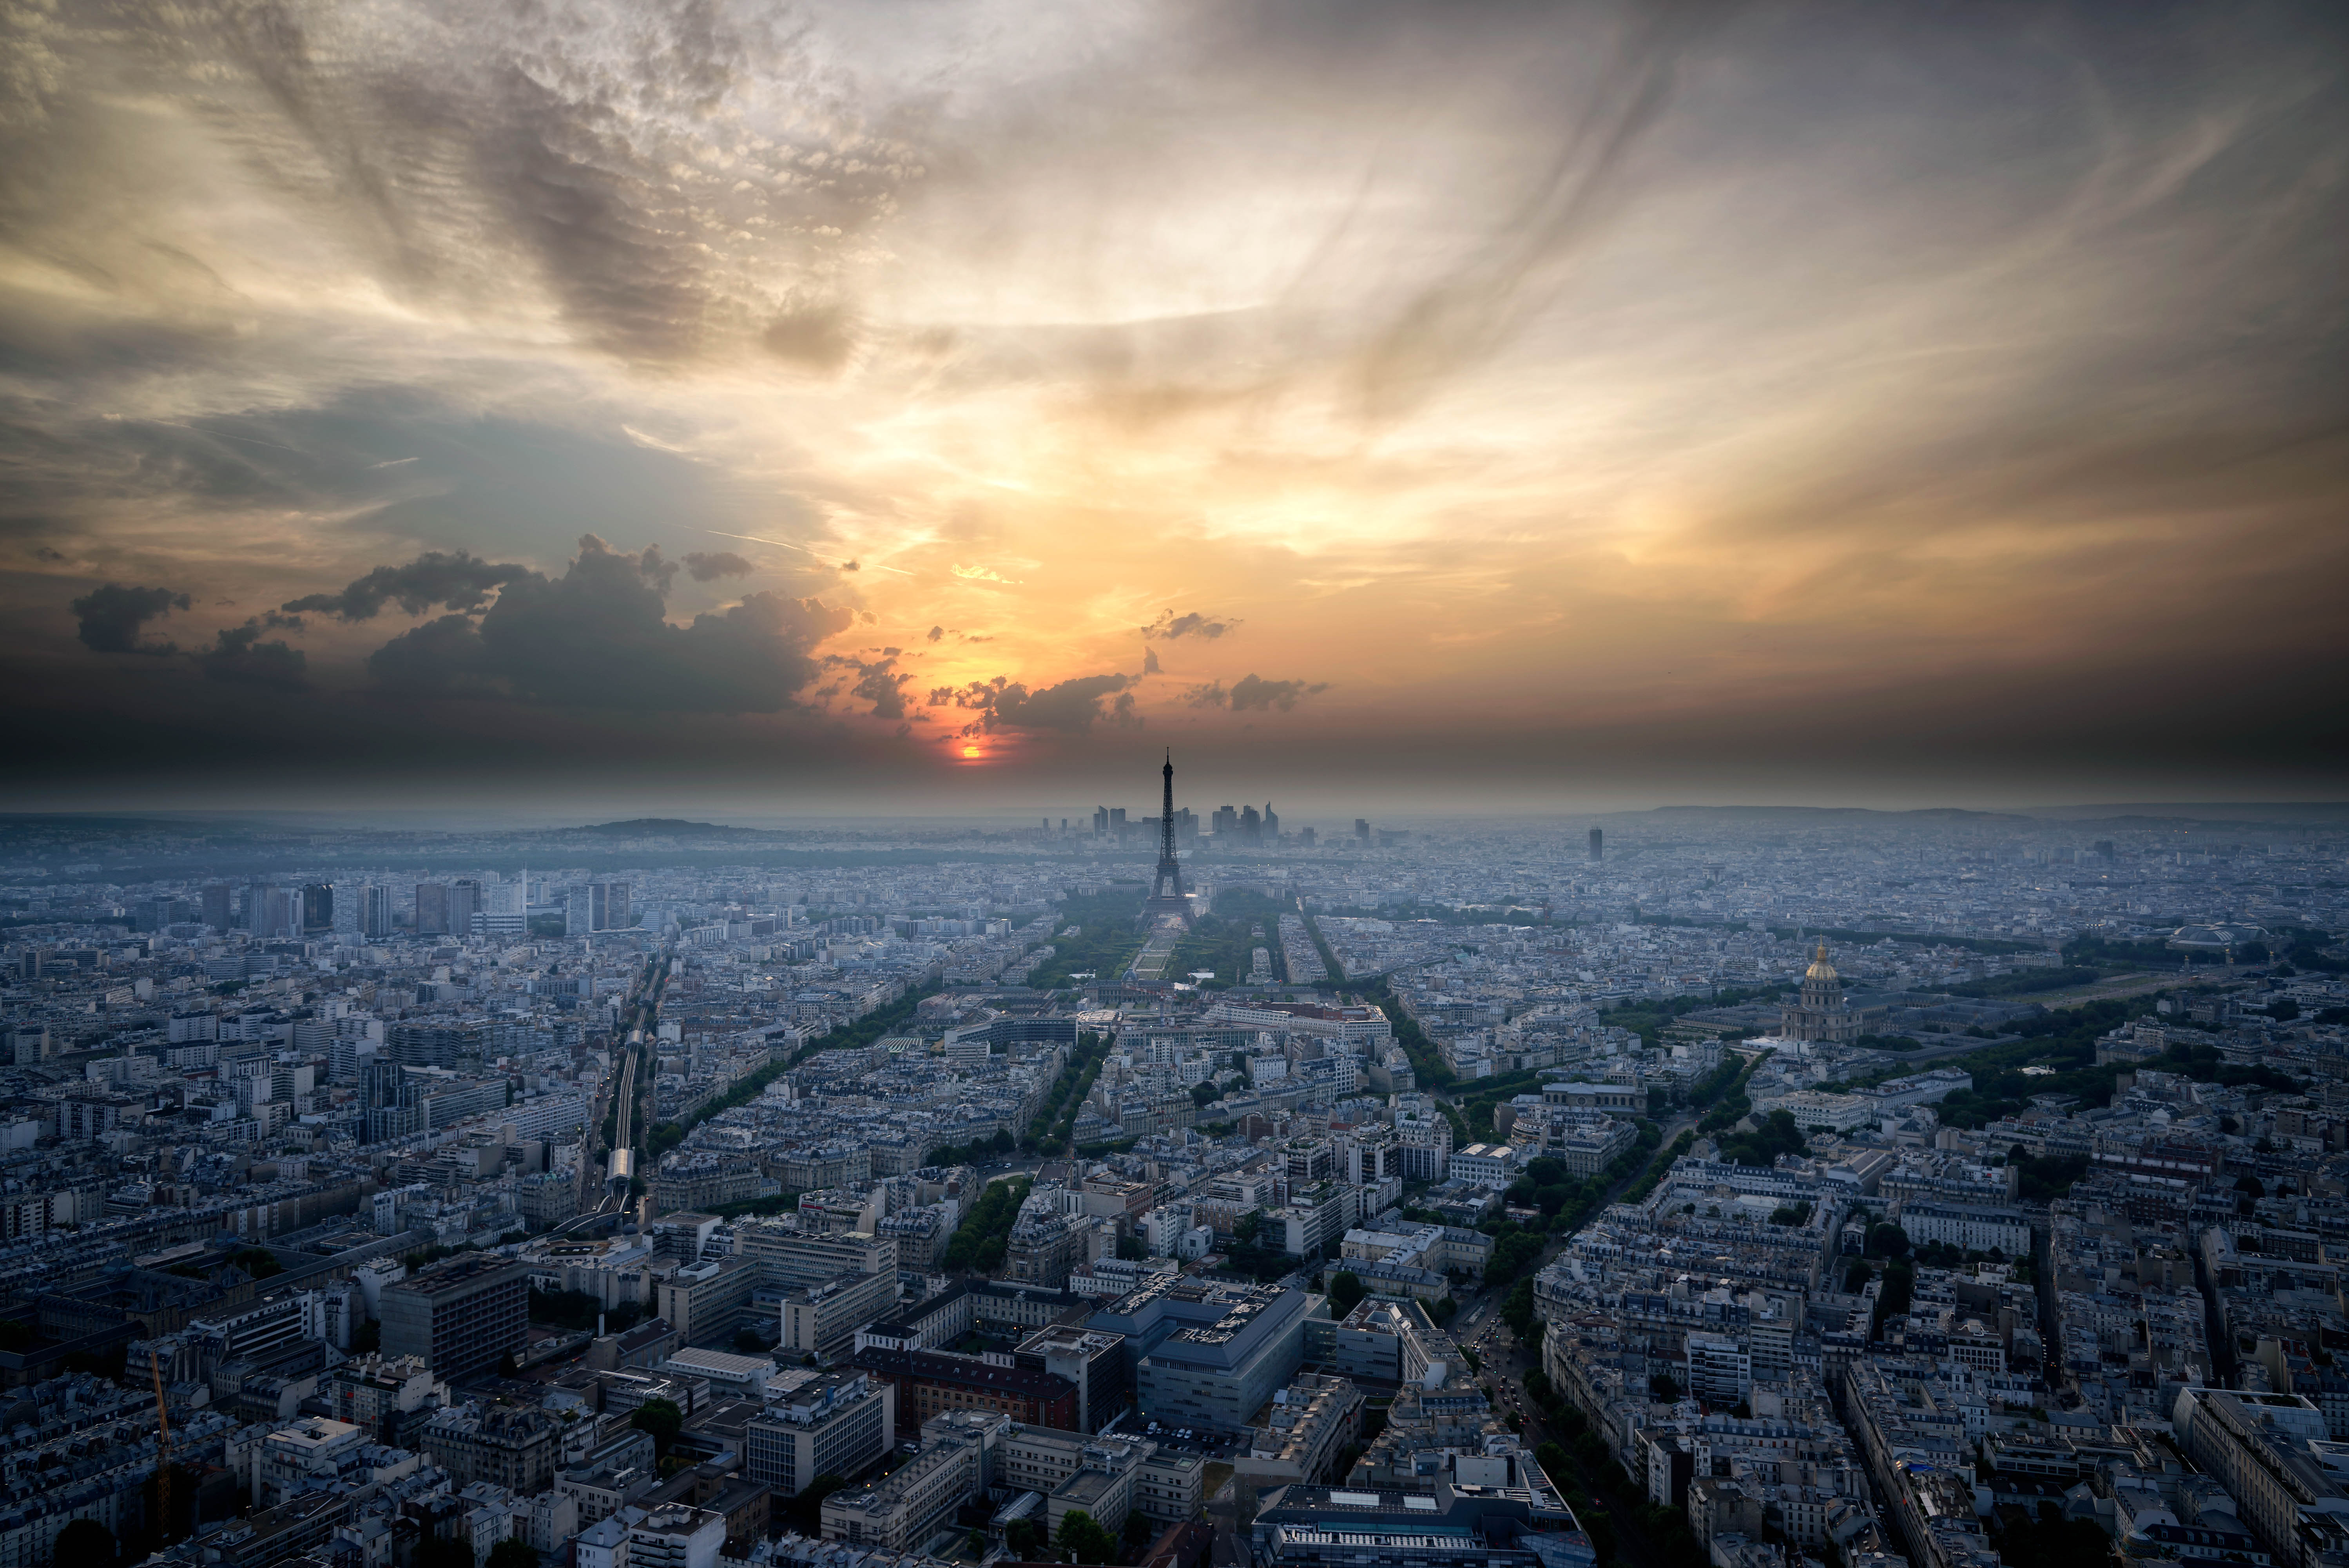 france, cities, sunset, sky, architecture, paris, view from above